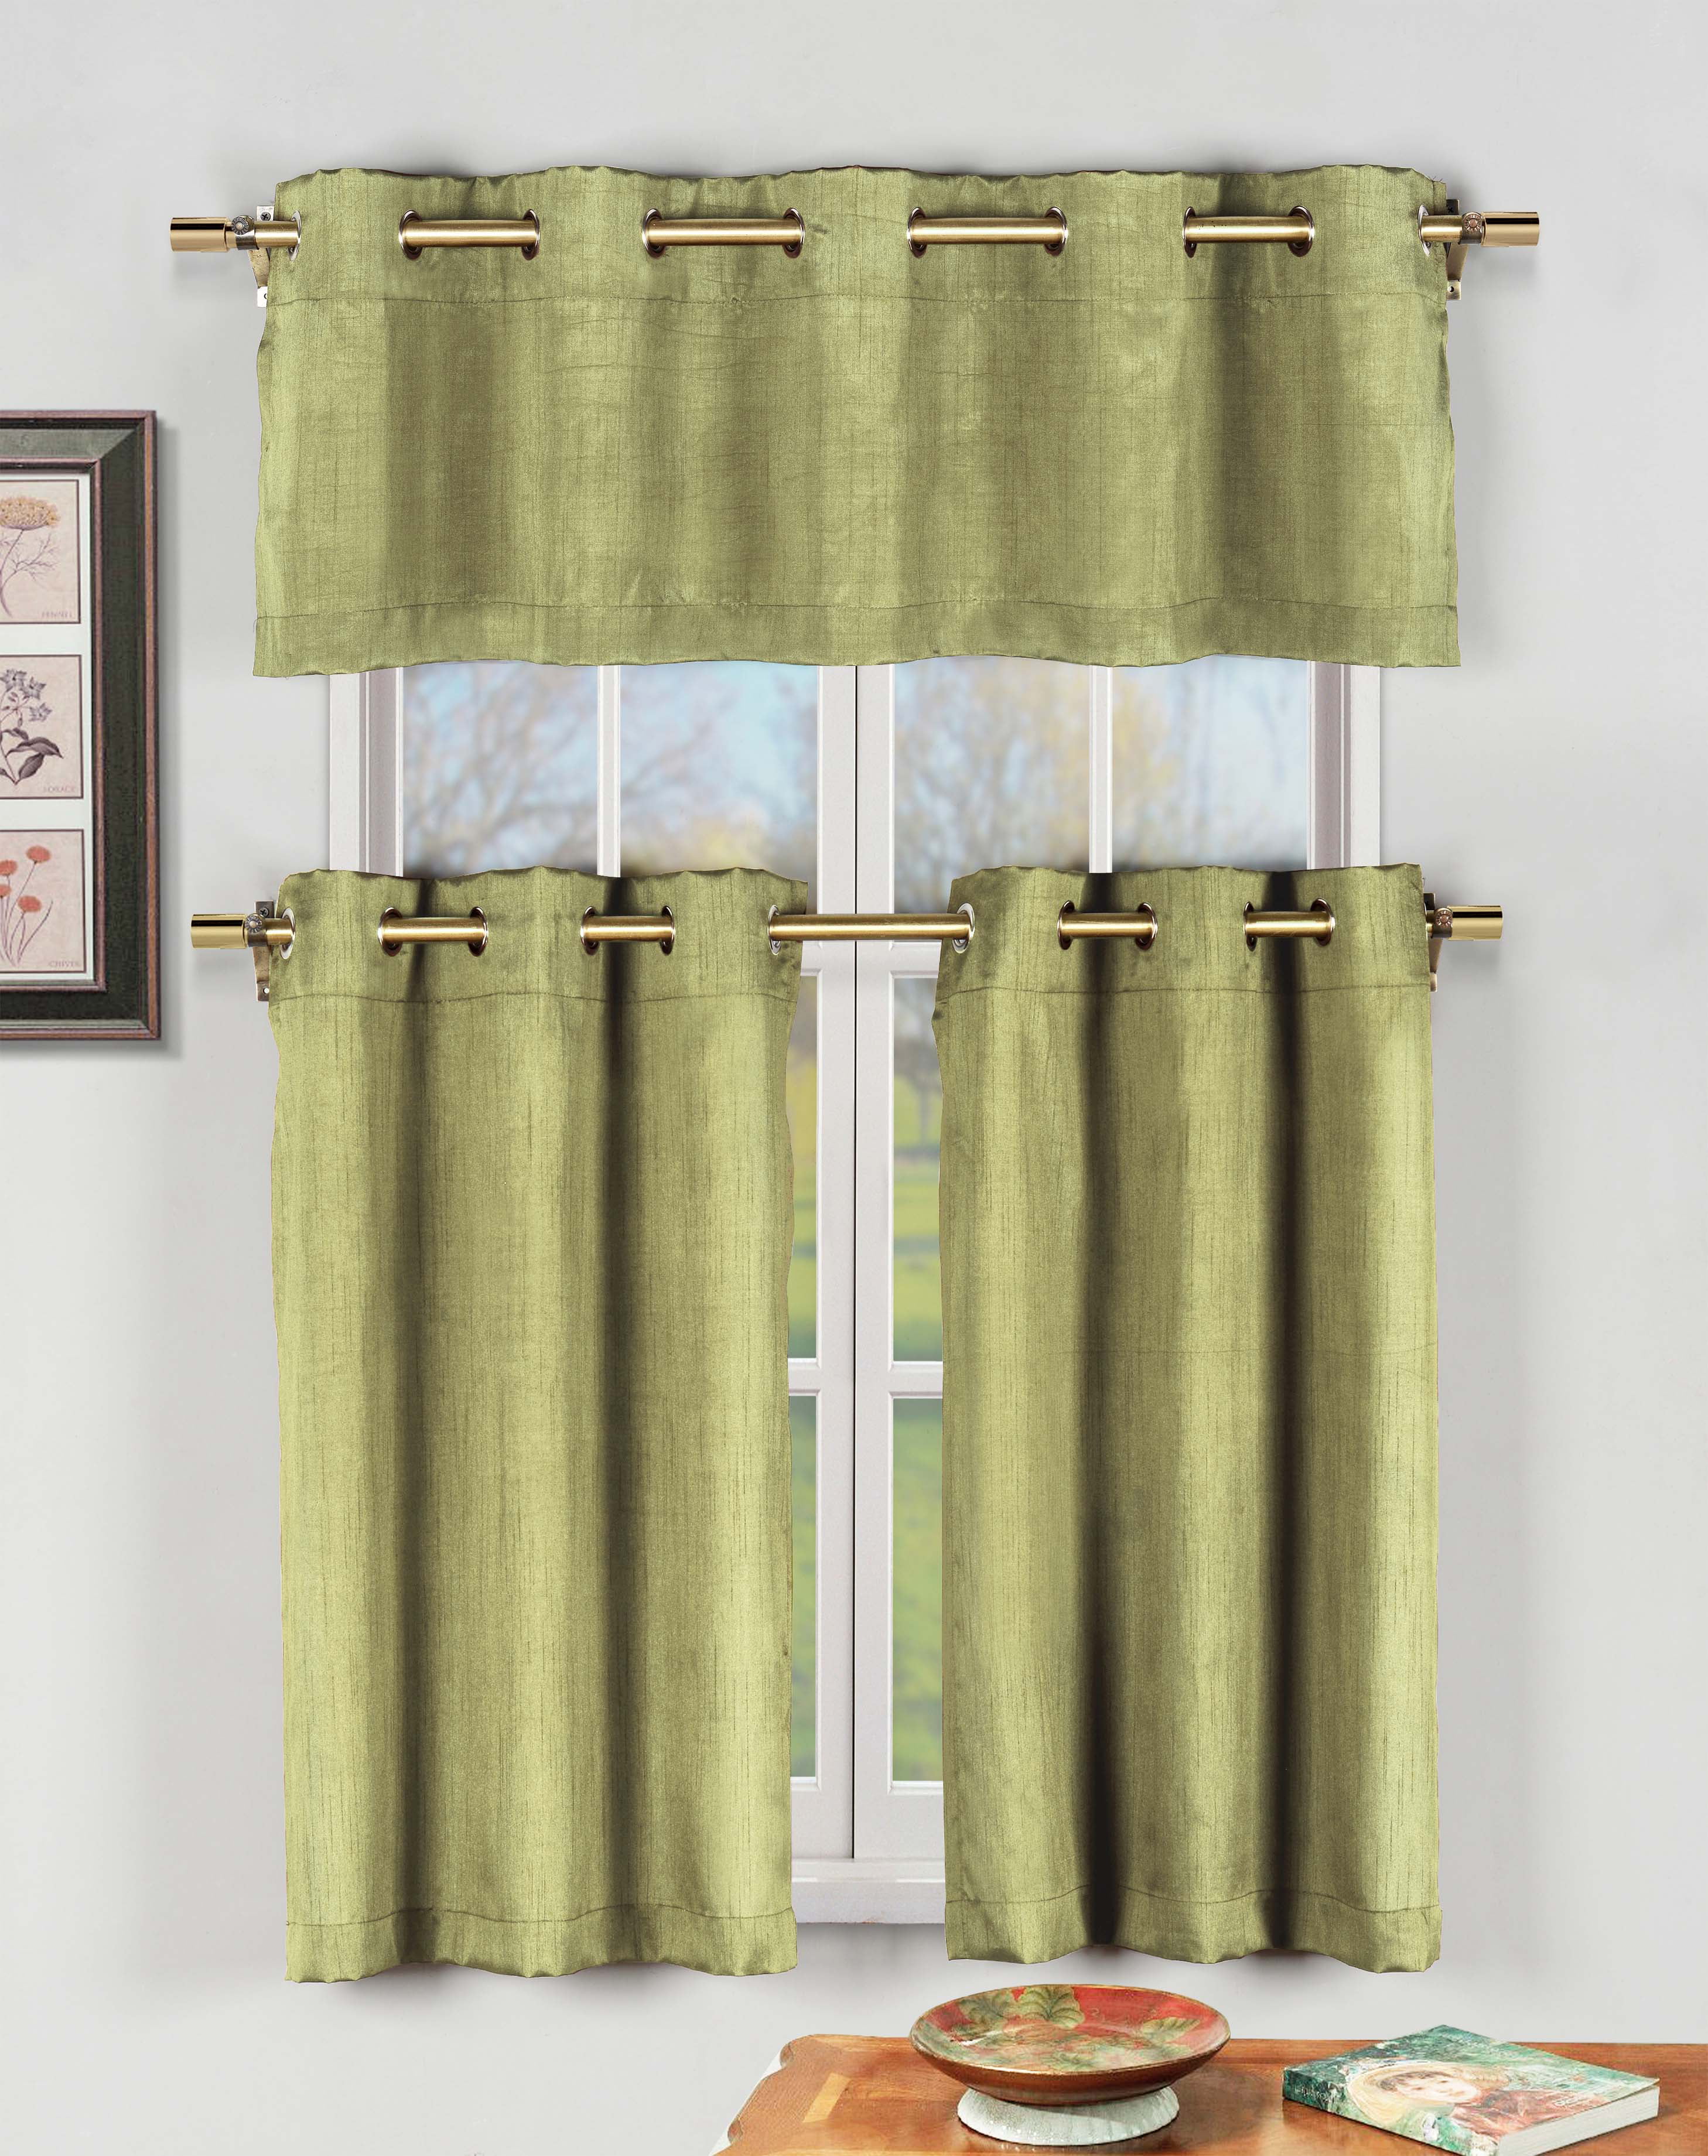 Champagne 3 Pc Kitchen Window Curtain Set w/ Metal Grommets 2 Tiers 1 Valance 